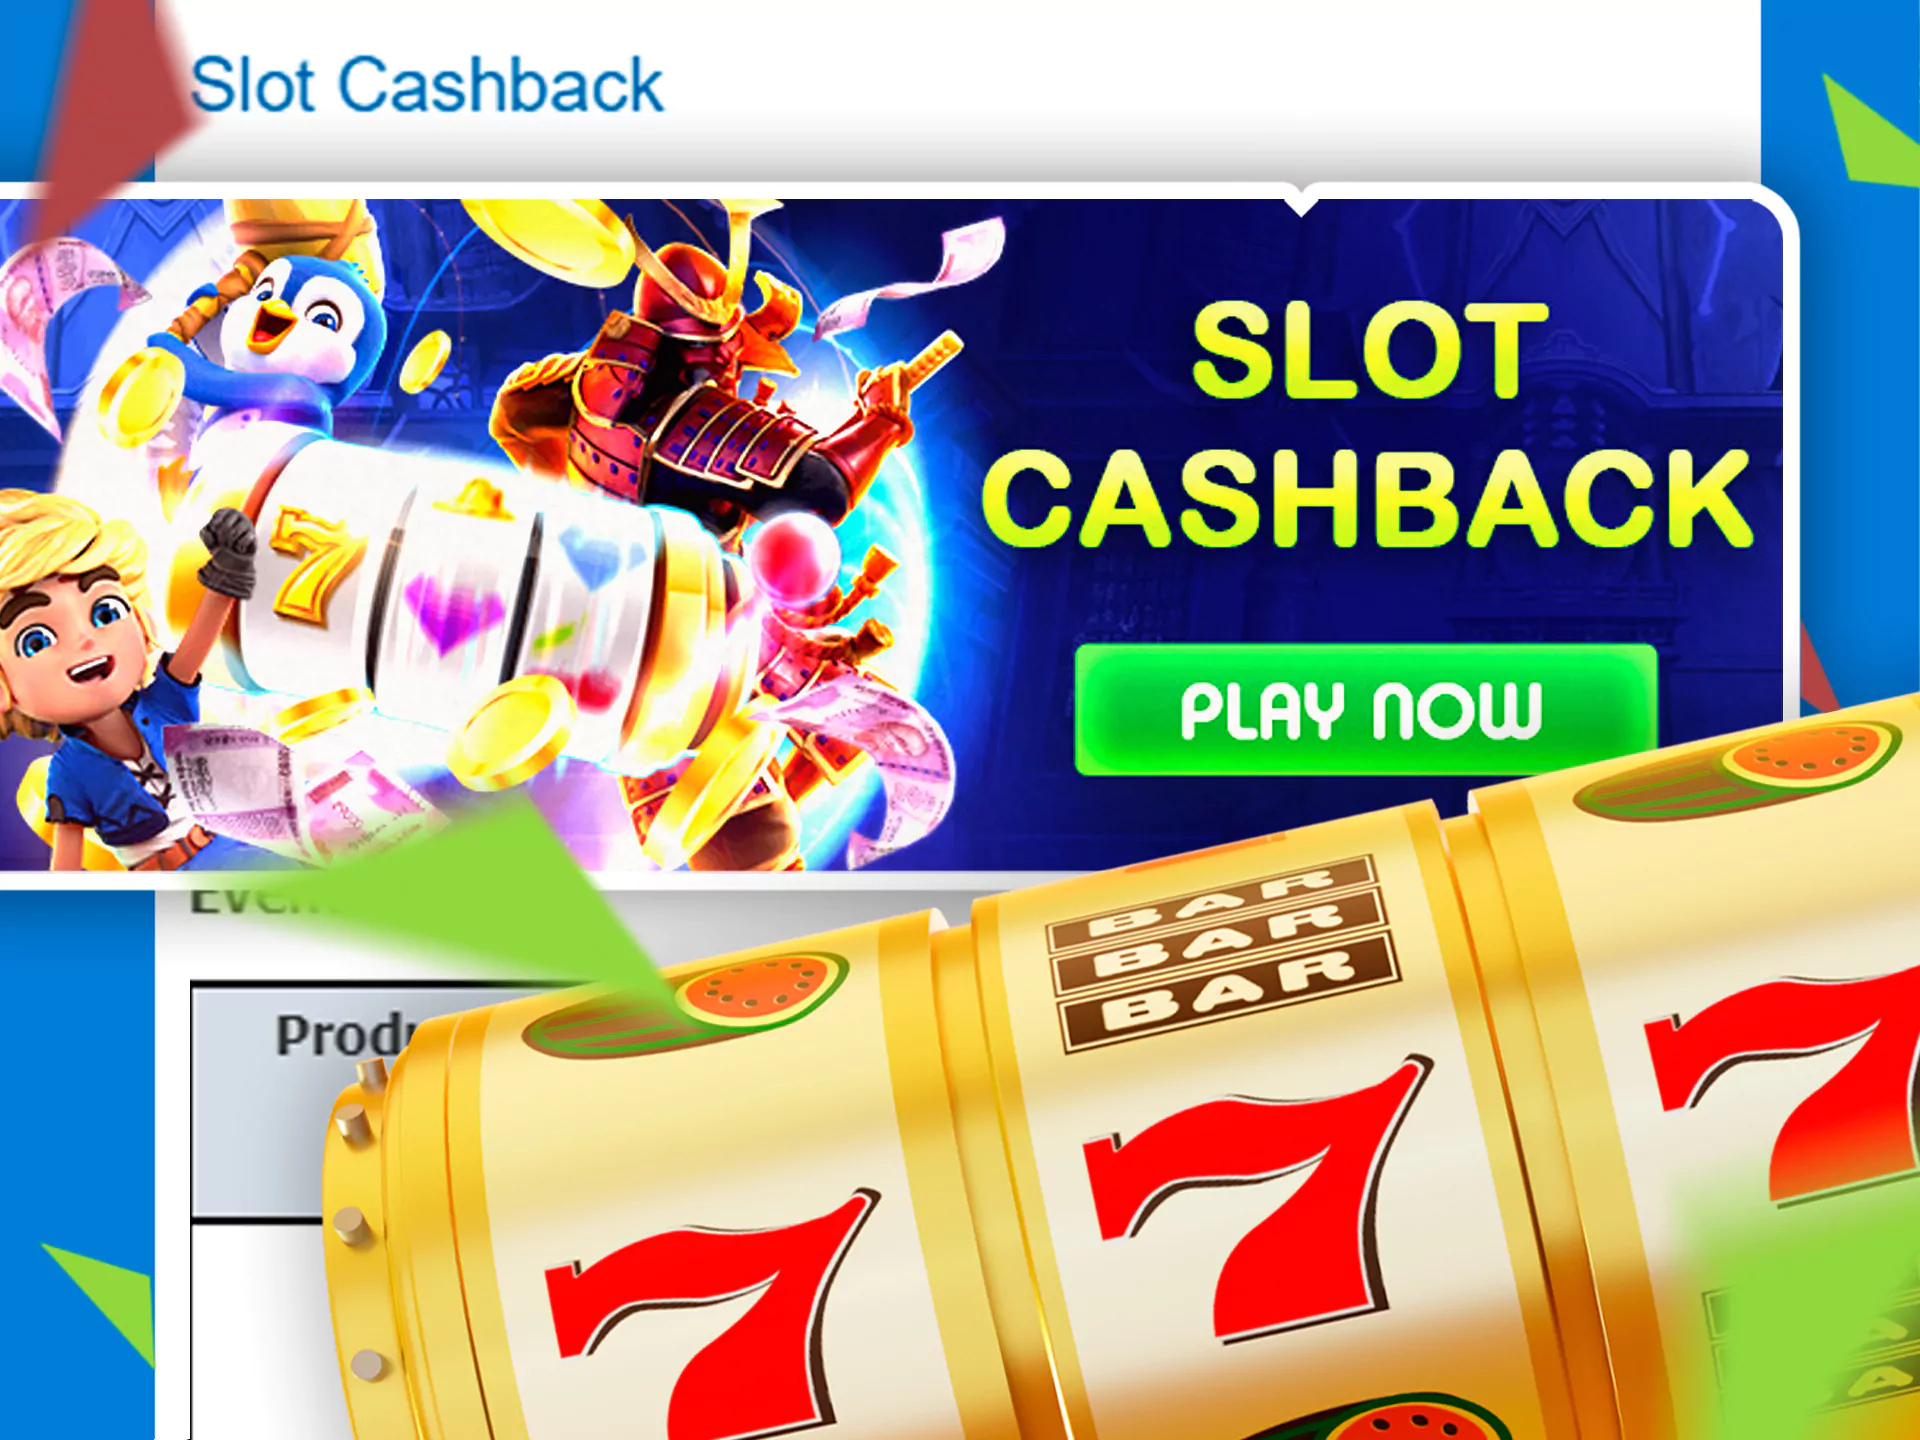 Play slots on Crickex and get money back to your account.